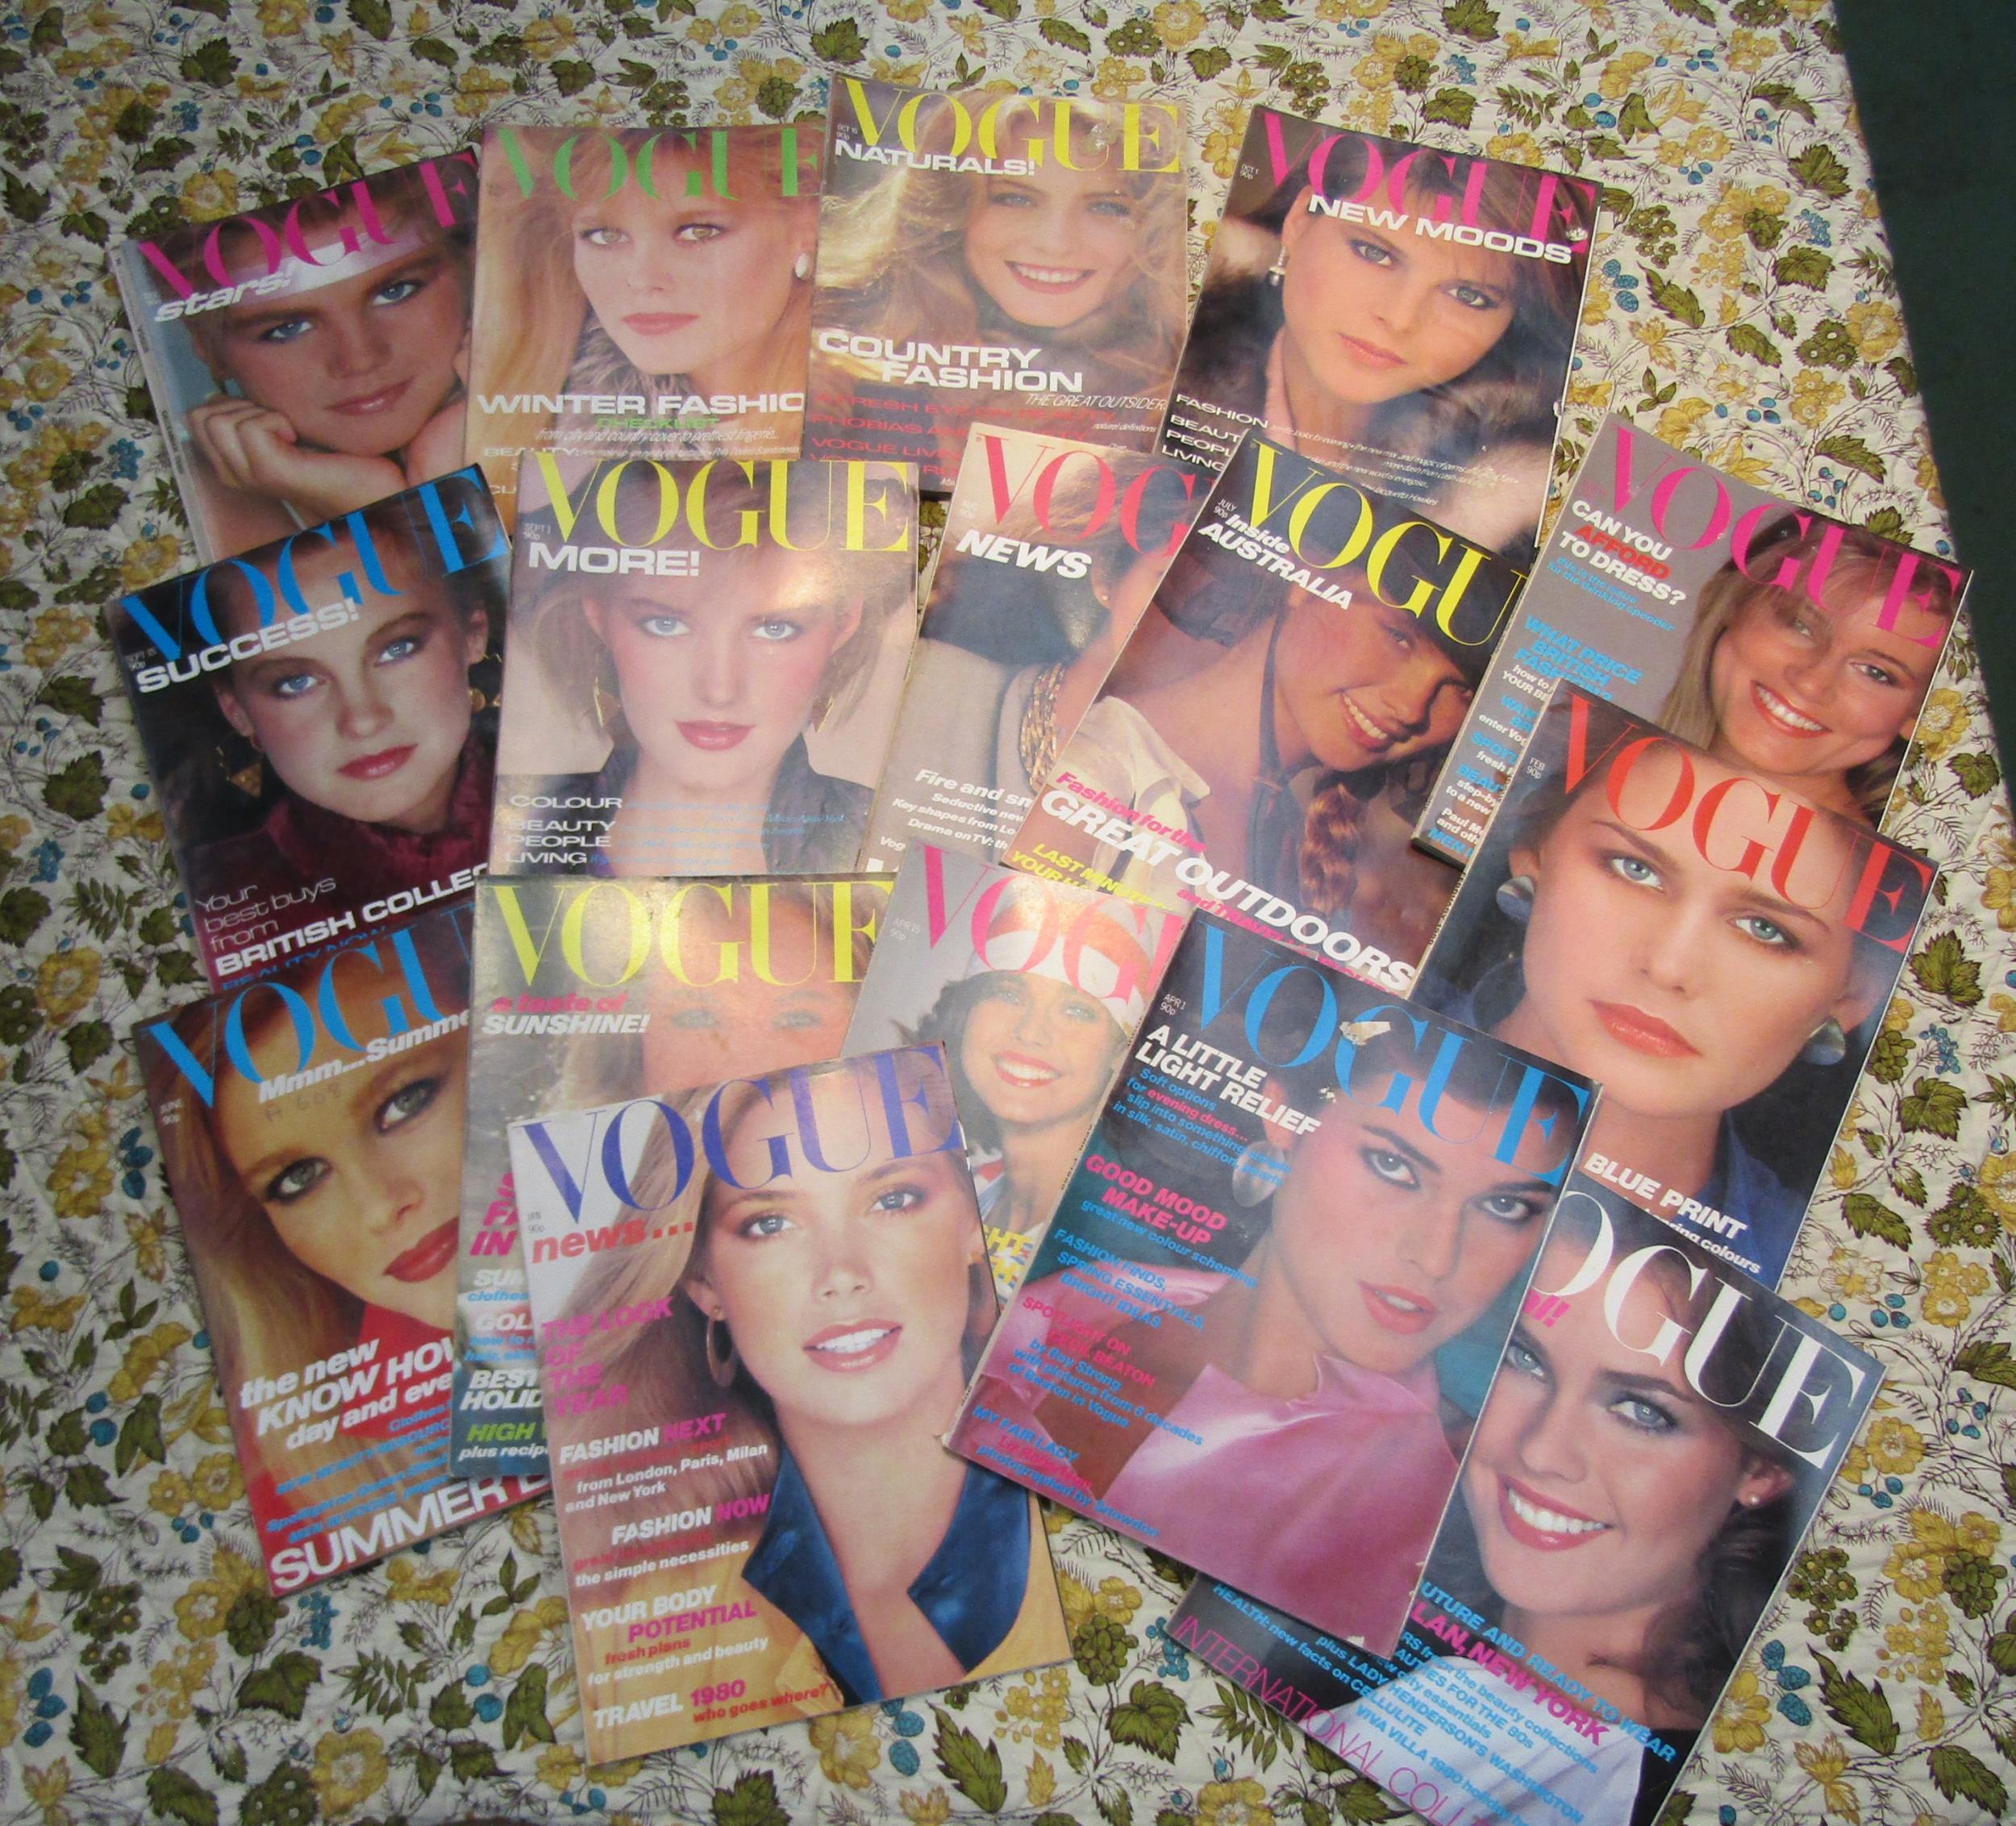 British Vogue magazine 1980 - January (1), February (2), March 1st (3), March 15th (4), April 1st (